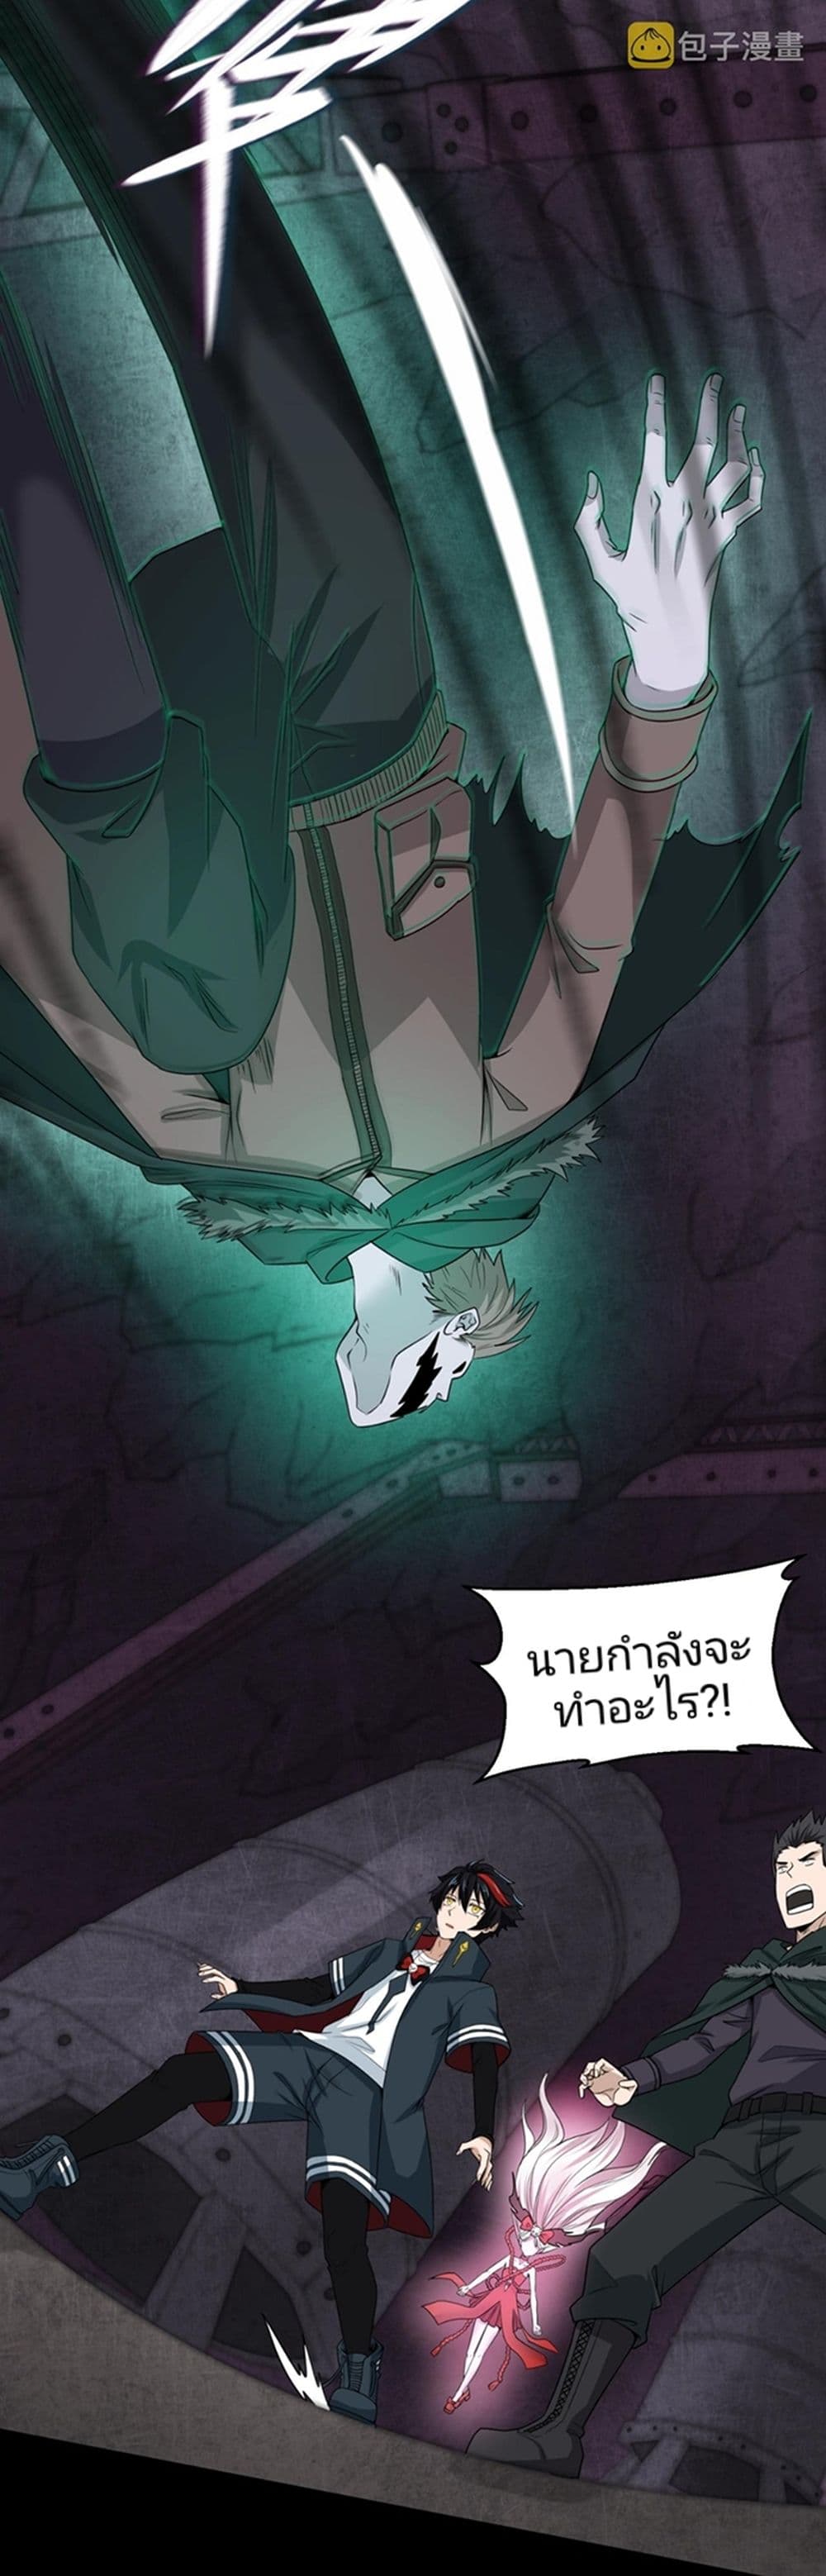 The Age of Ghost Spirits à¸à¸­à¸à¸à¸µà¹ 7 (5)